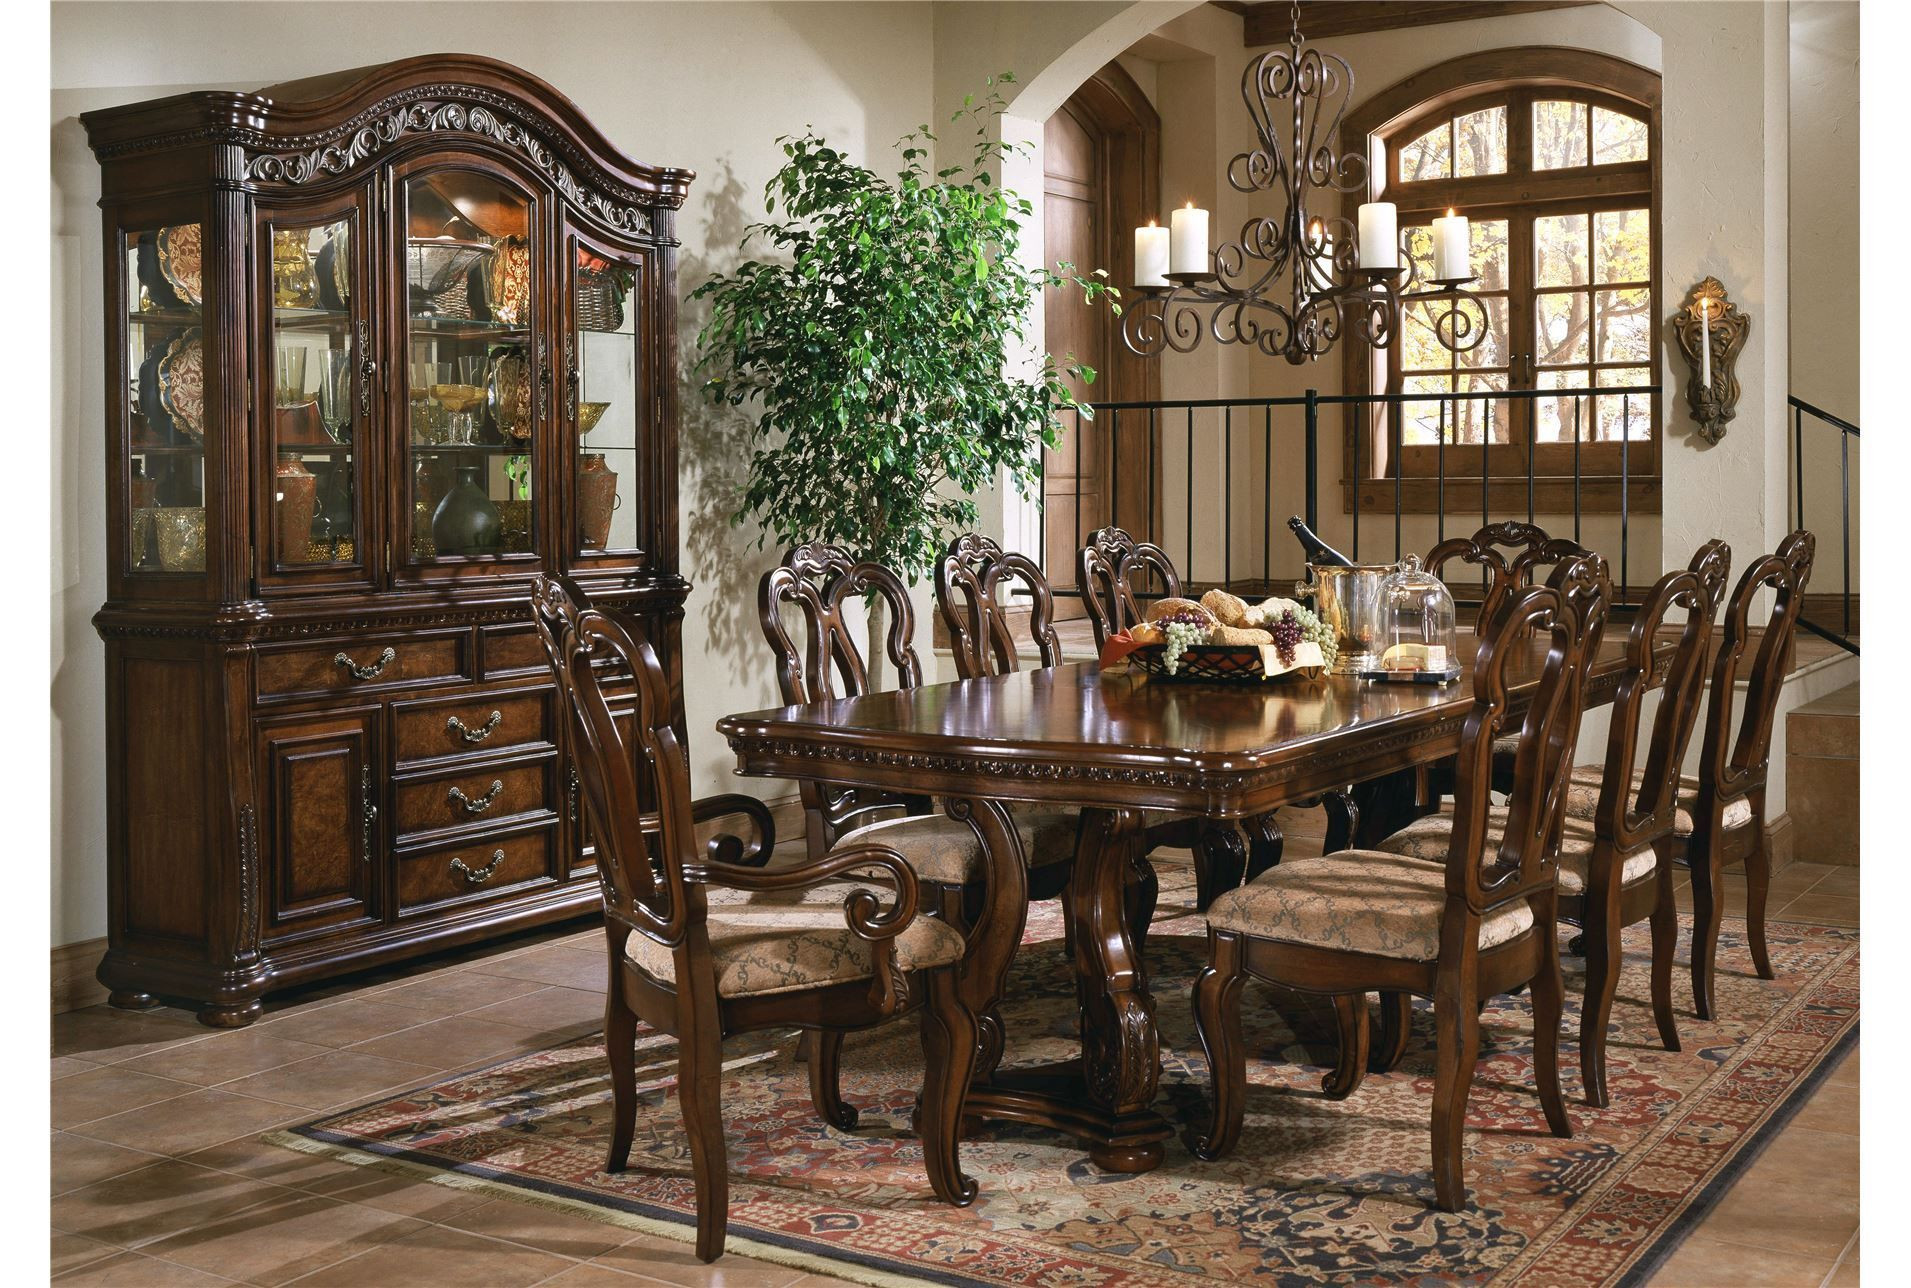 Living Spaces Dining Table Set
 San Marino 7 Piece Dining Set Living Spaces